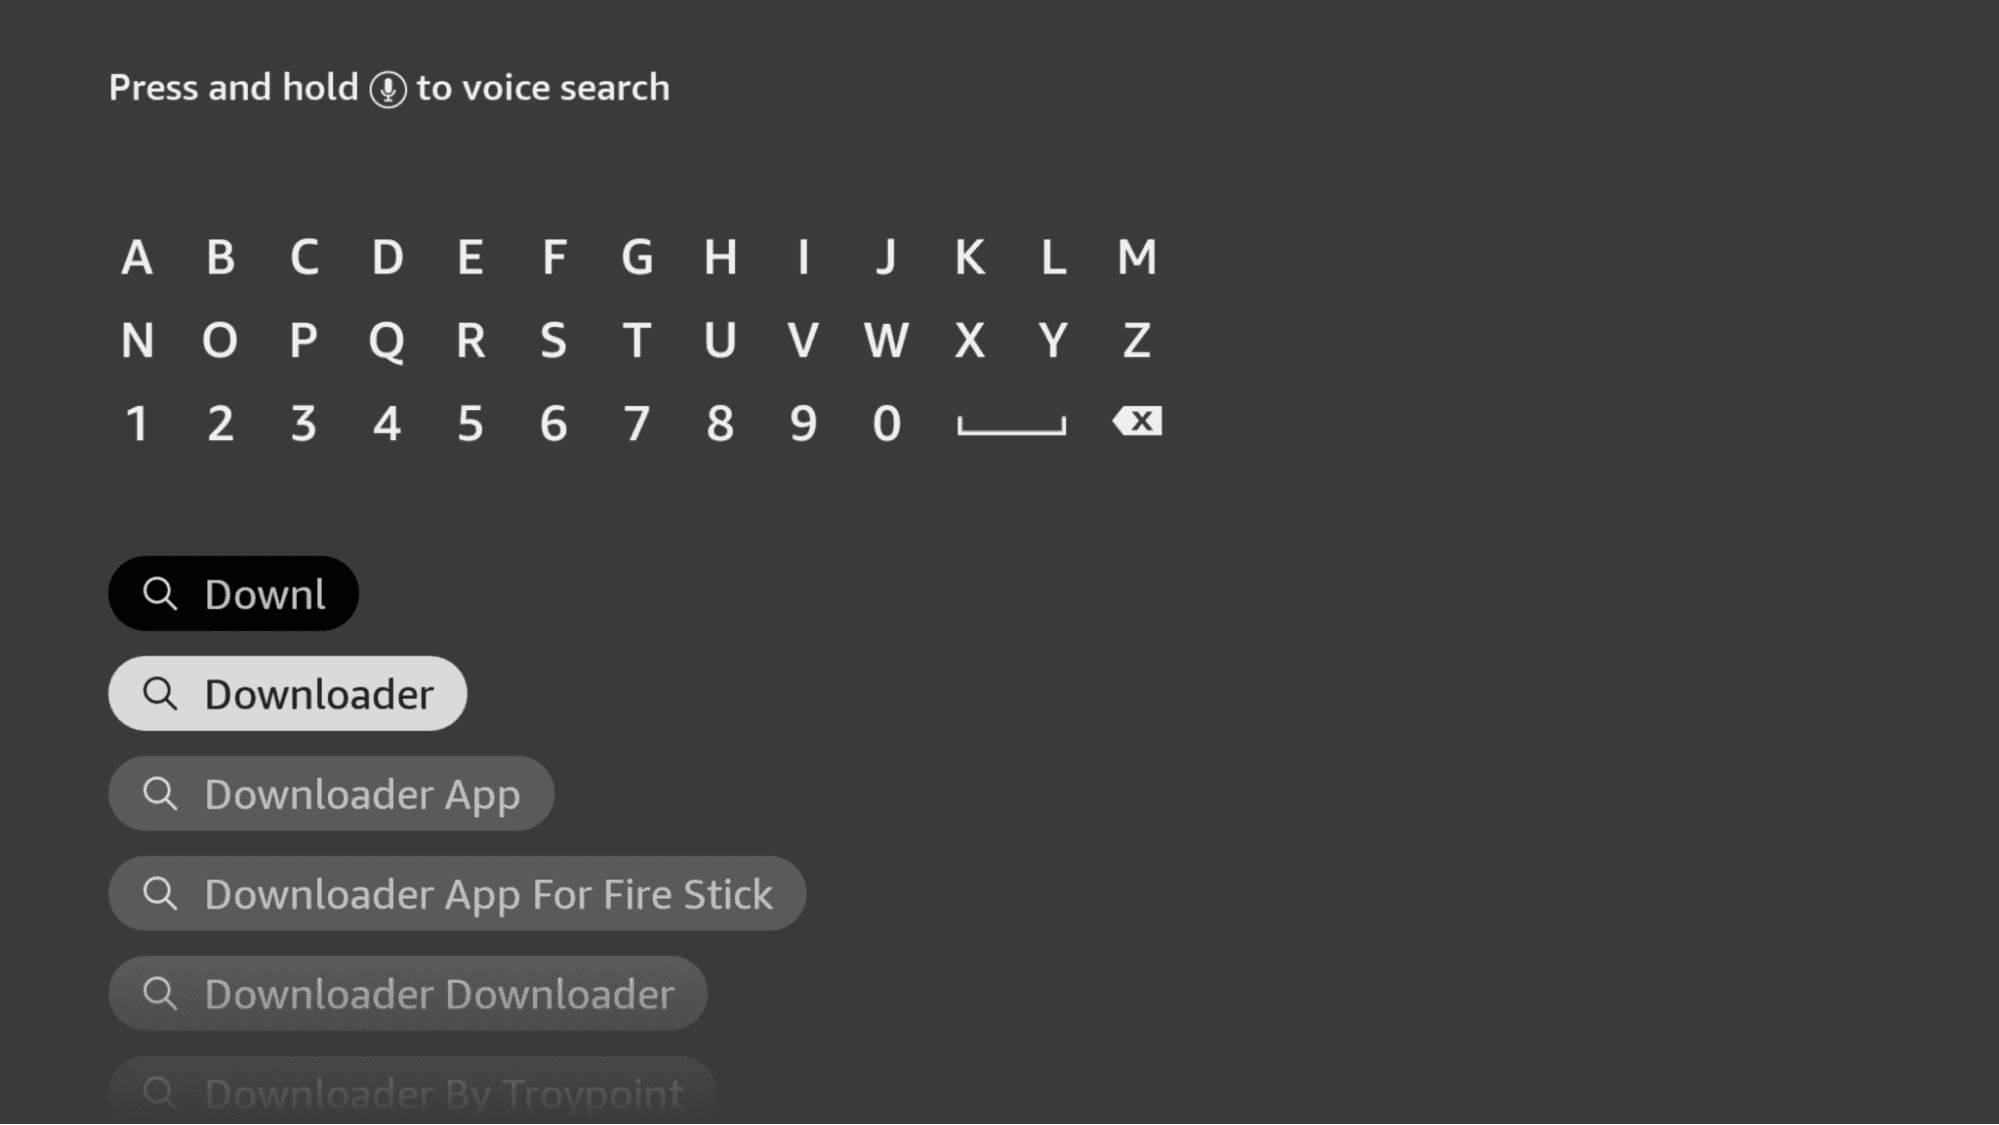 Searching for the Downloader app on Fire TV